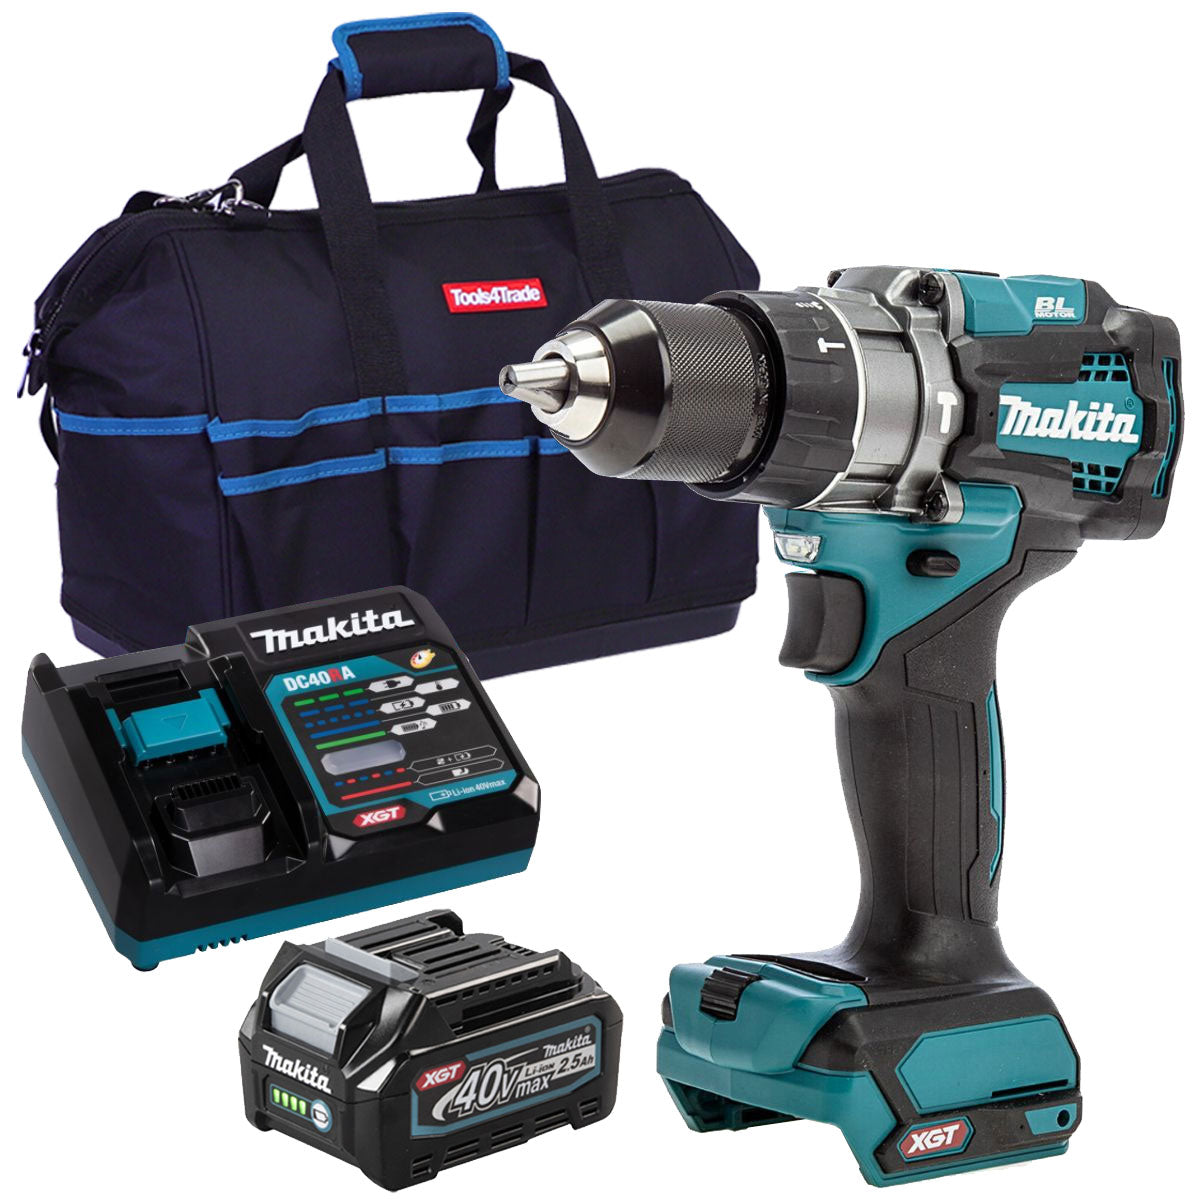 Makita HP001GZ 40V Brushless Combi Drill with 1 x 2.5Ah Battery Charger & Bag